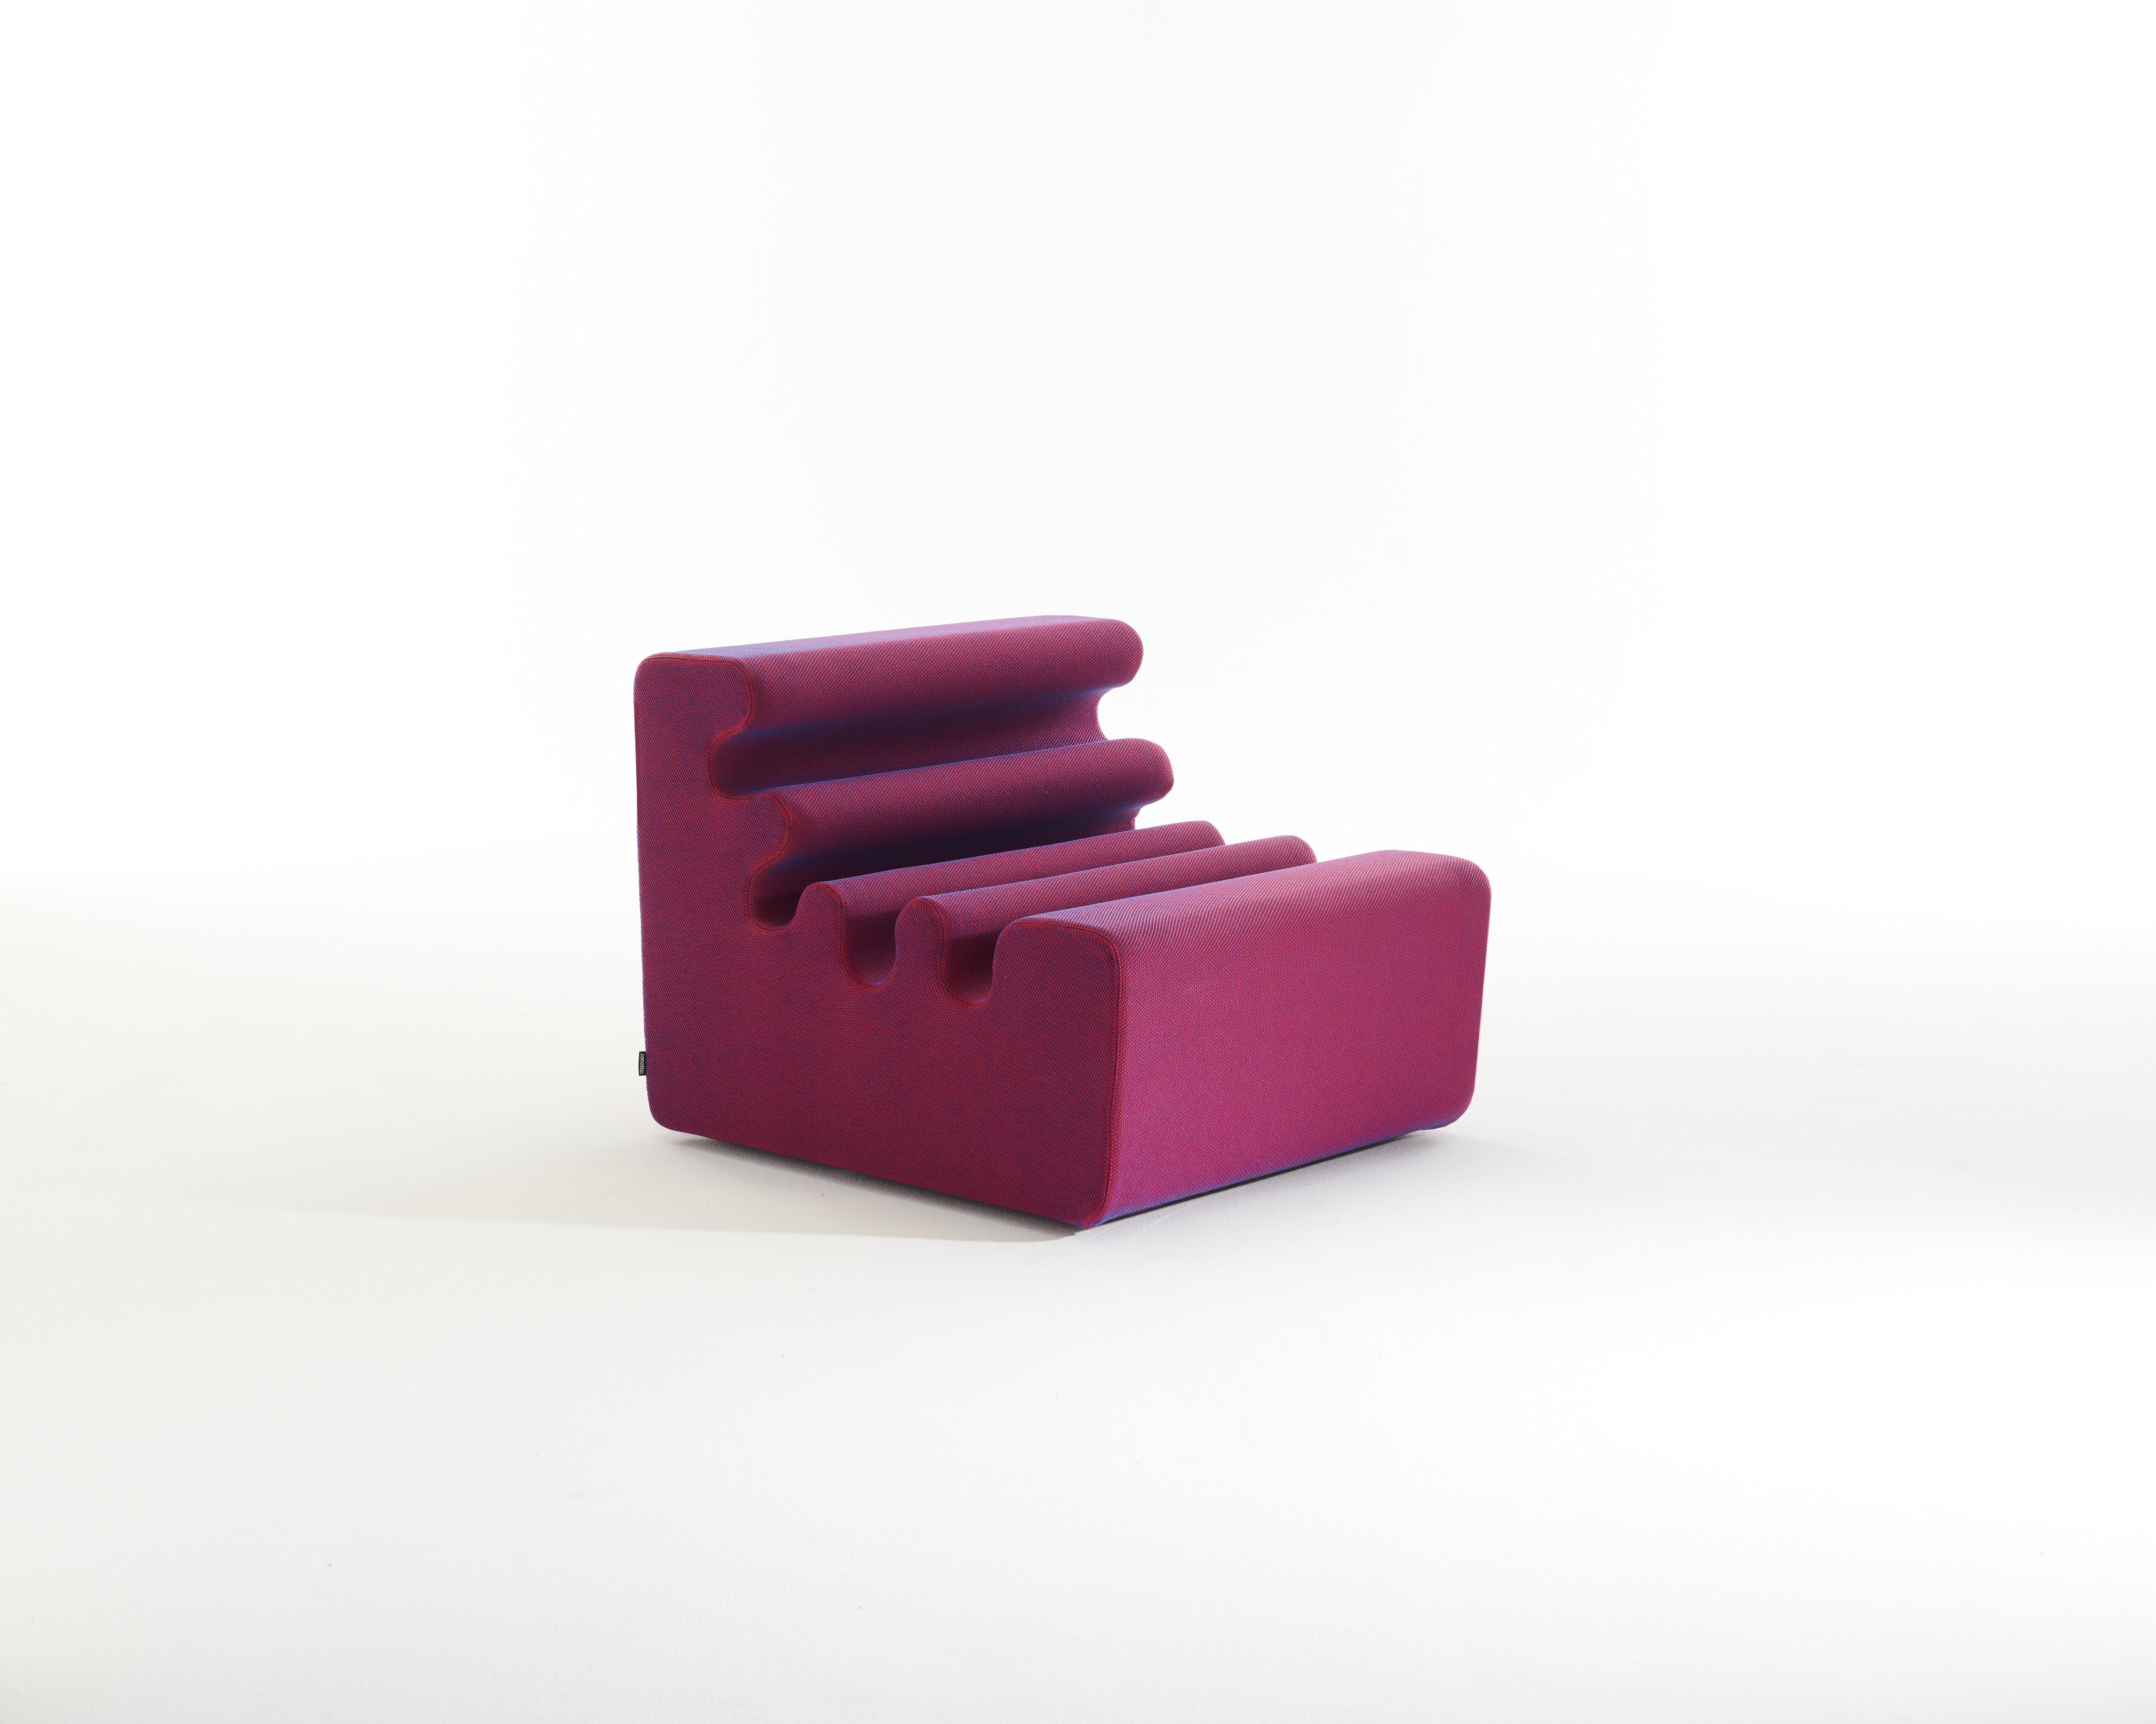 Customizable Karelia Lounge Chair by Liisi Beckmann In New Condition For Sale In New York, NY